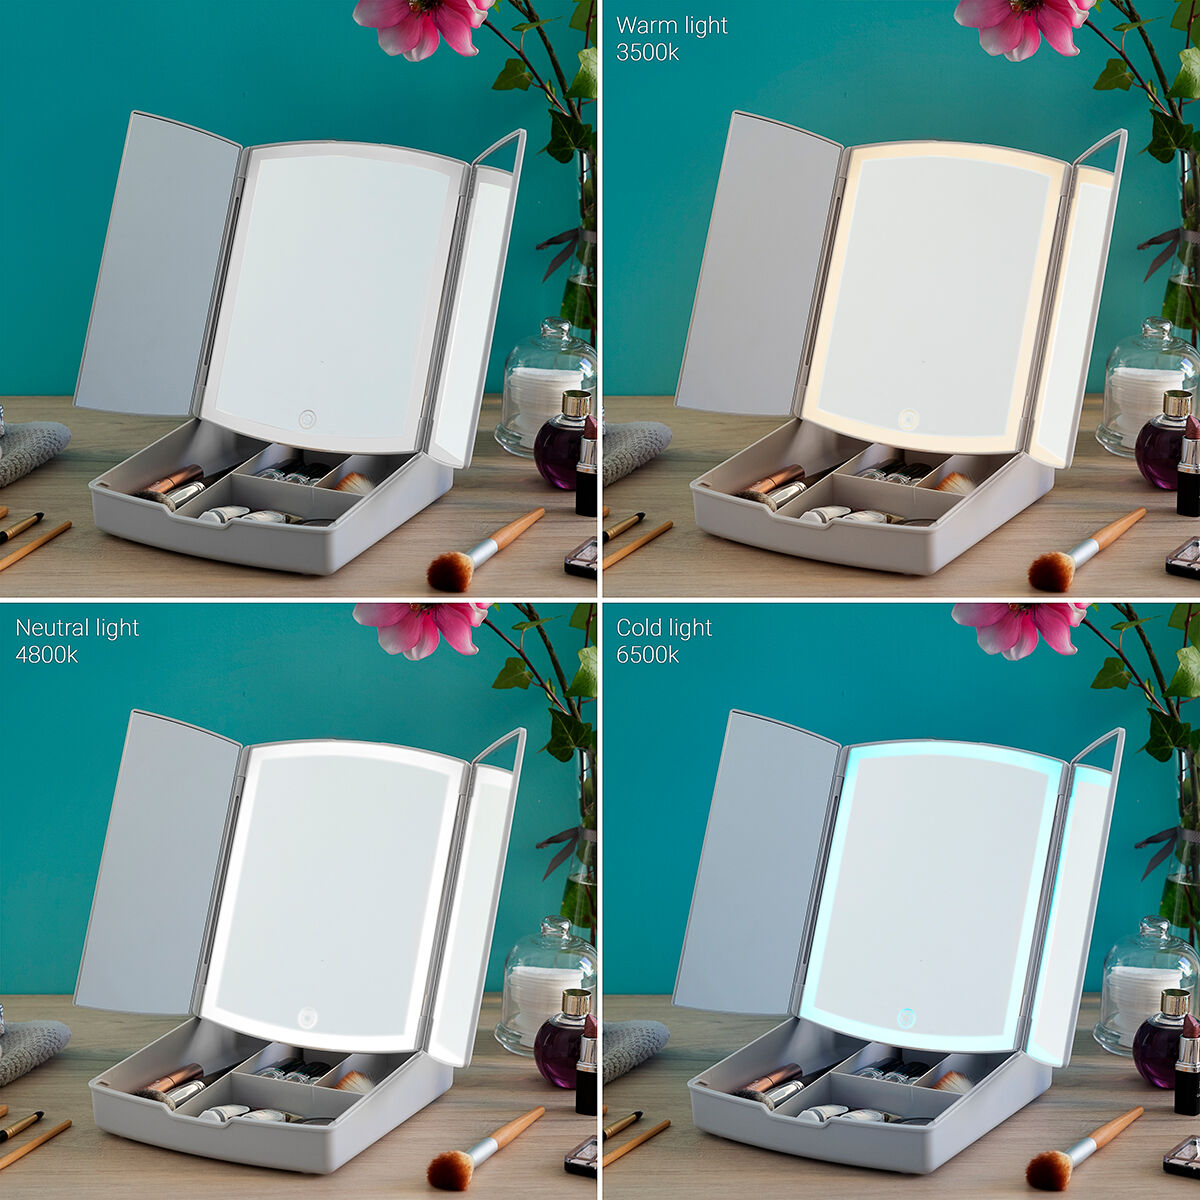 3-In-1 Folding LED Mirror with Make-up Organiser Panomir InnovaGoods